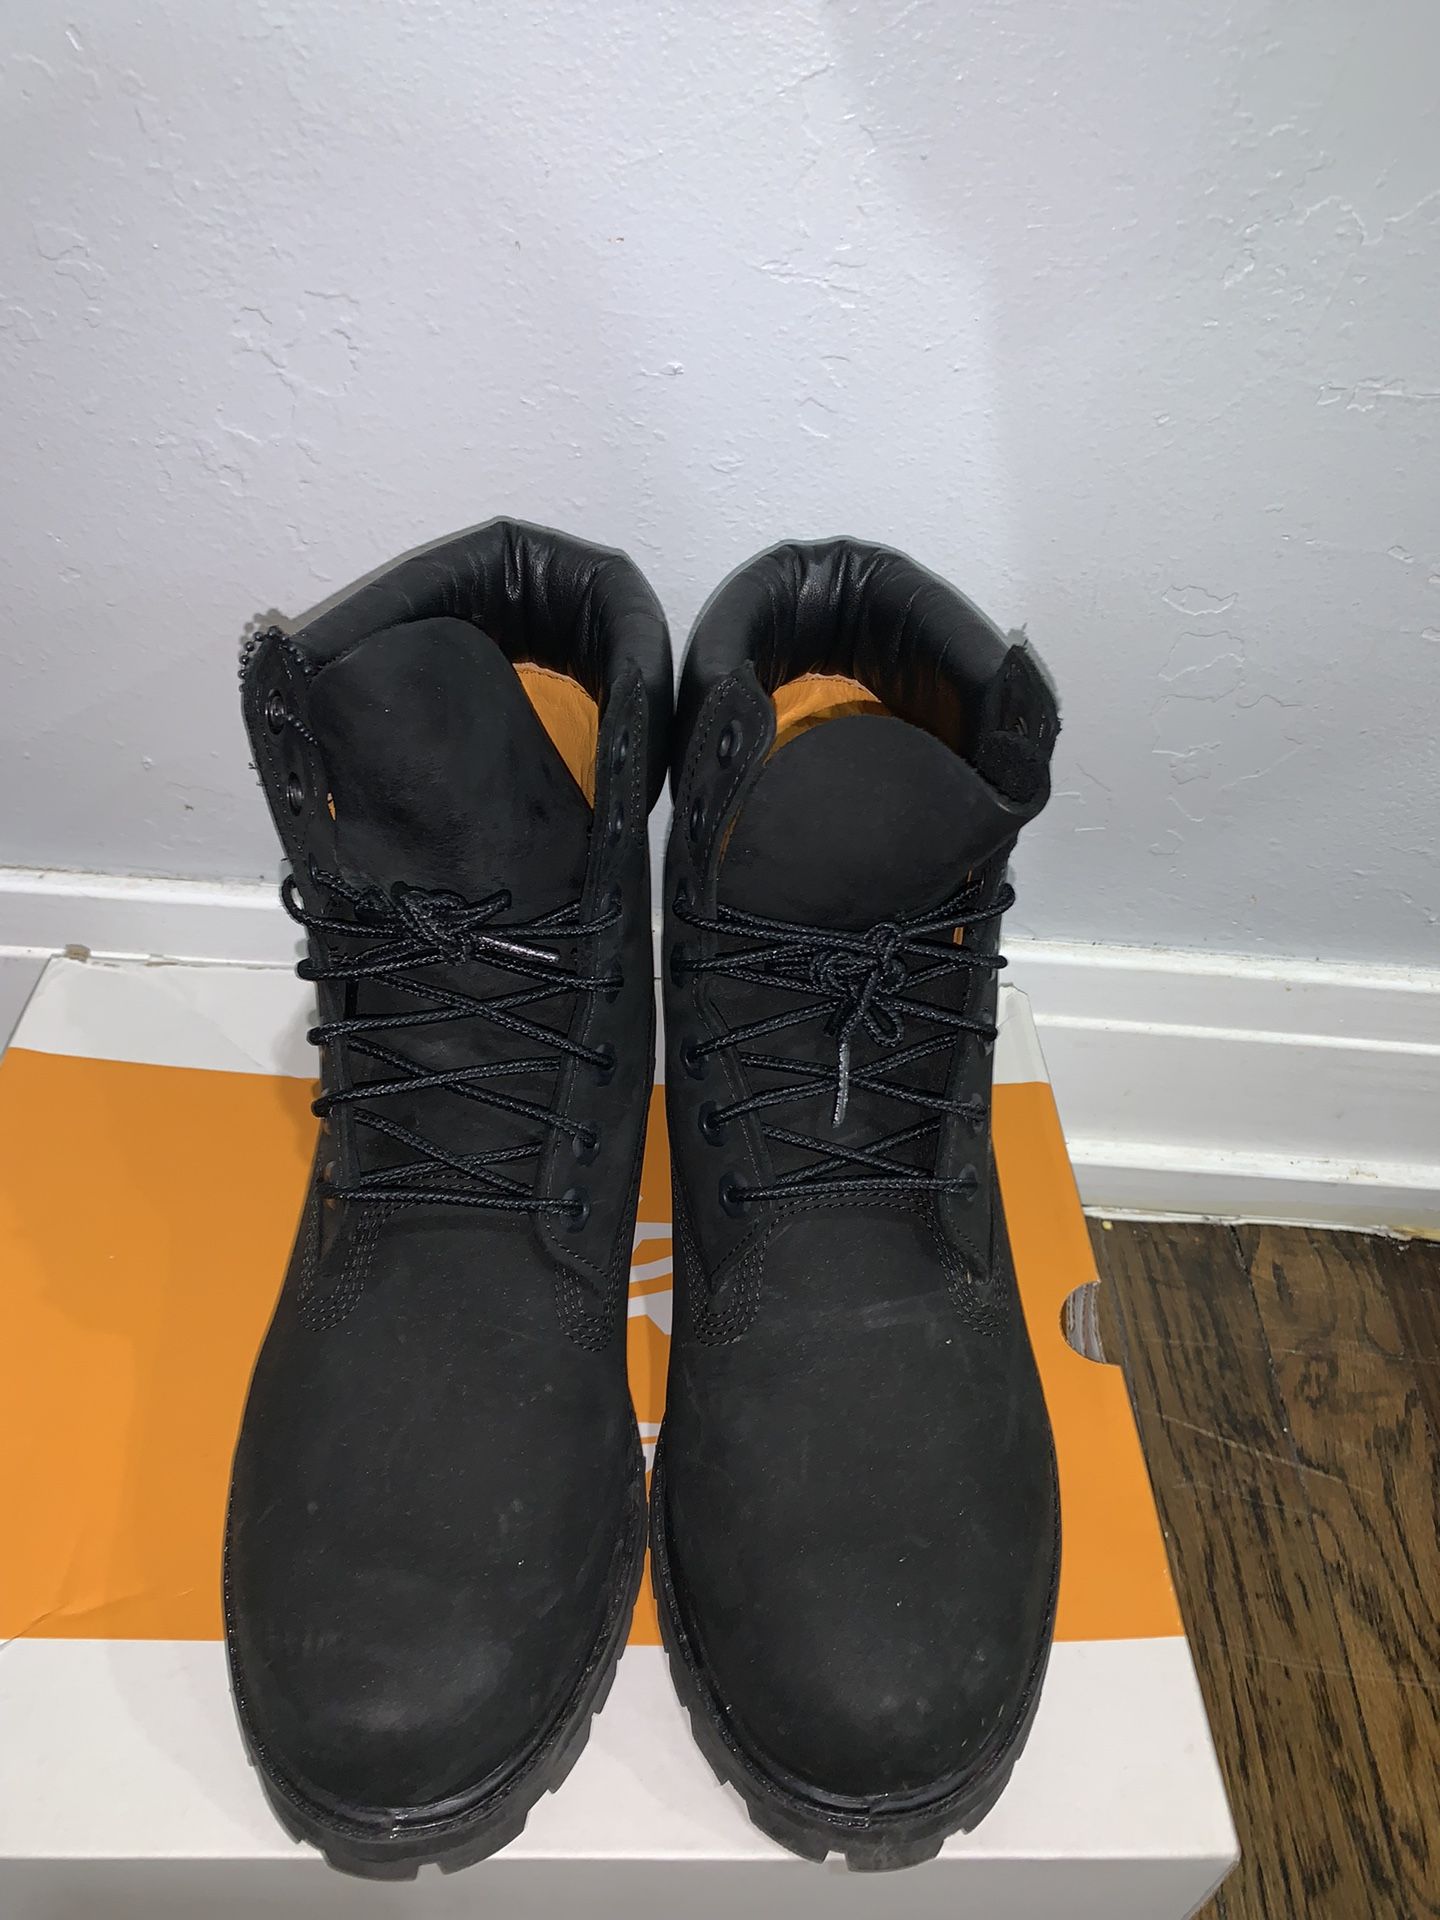 Timberland Classic Boots Size 9